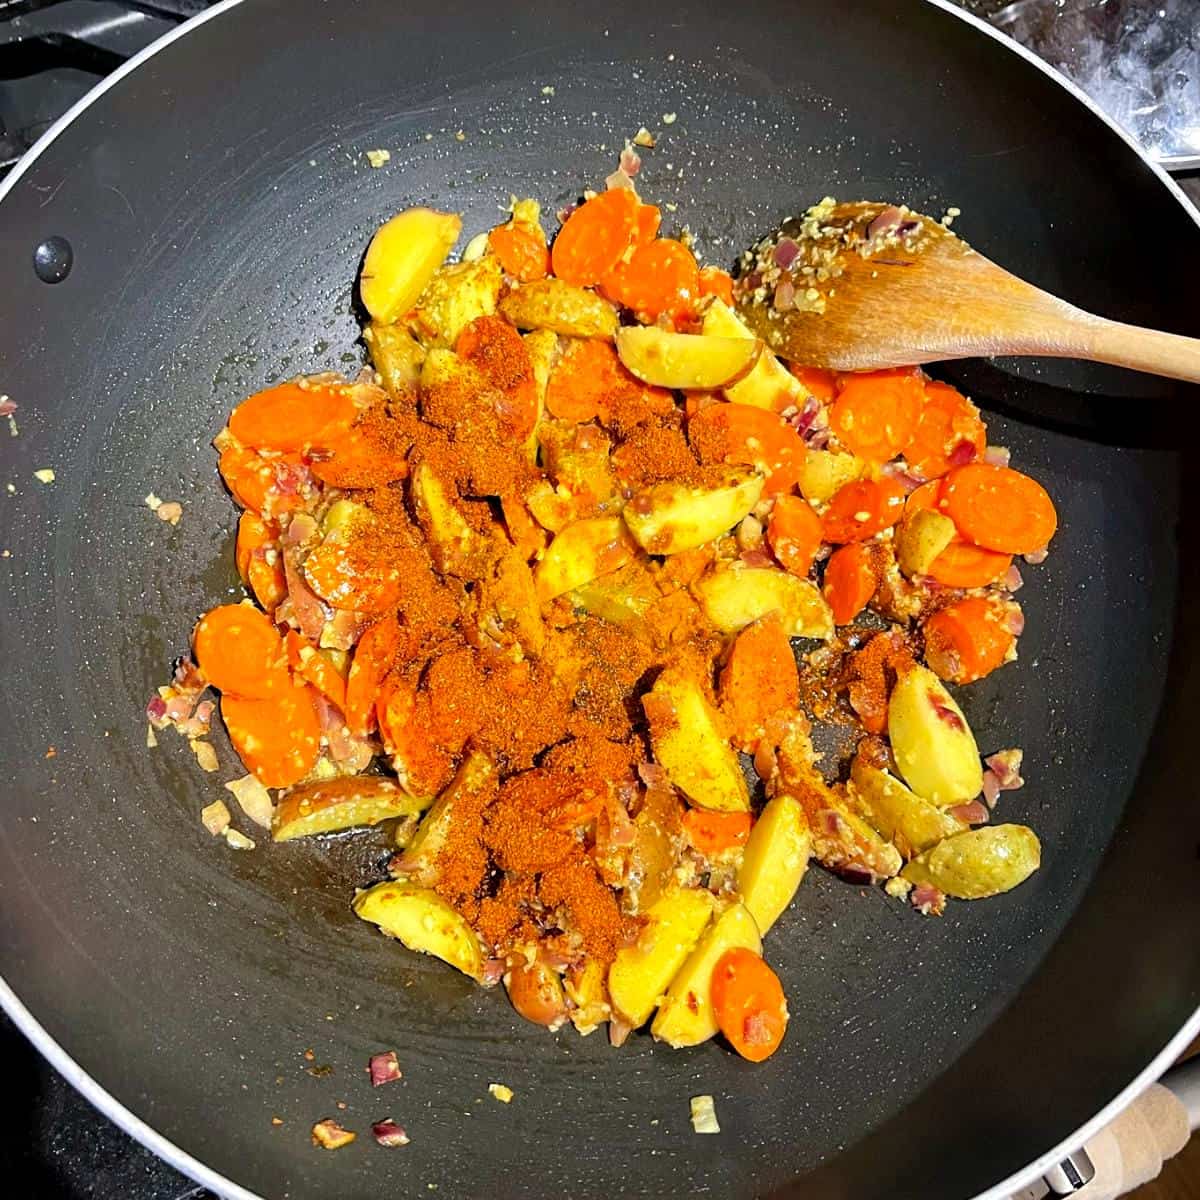 Potatoes, carrots and spices added to onions in wok.